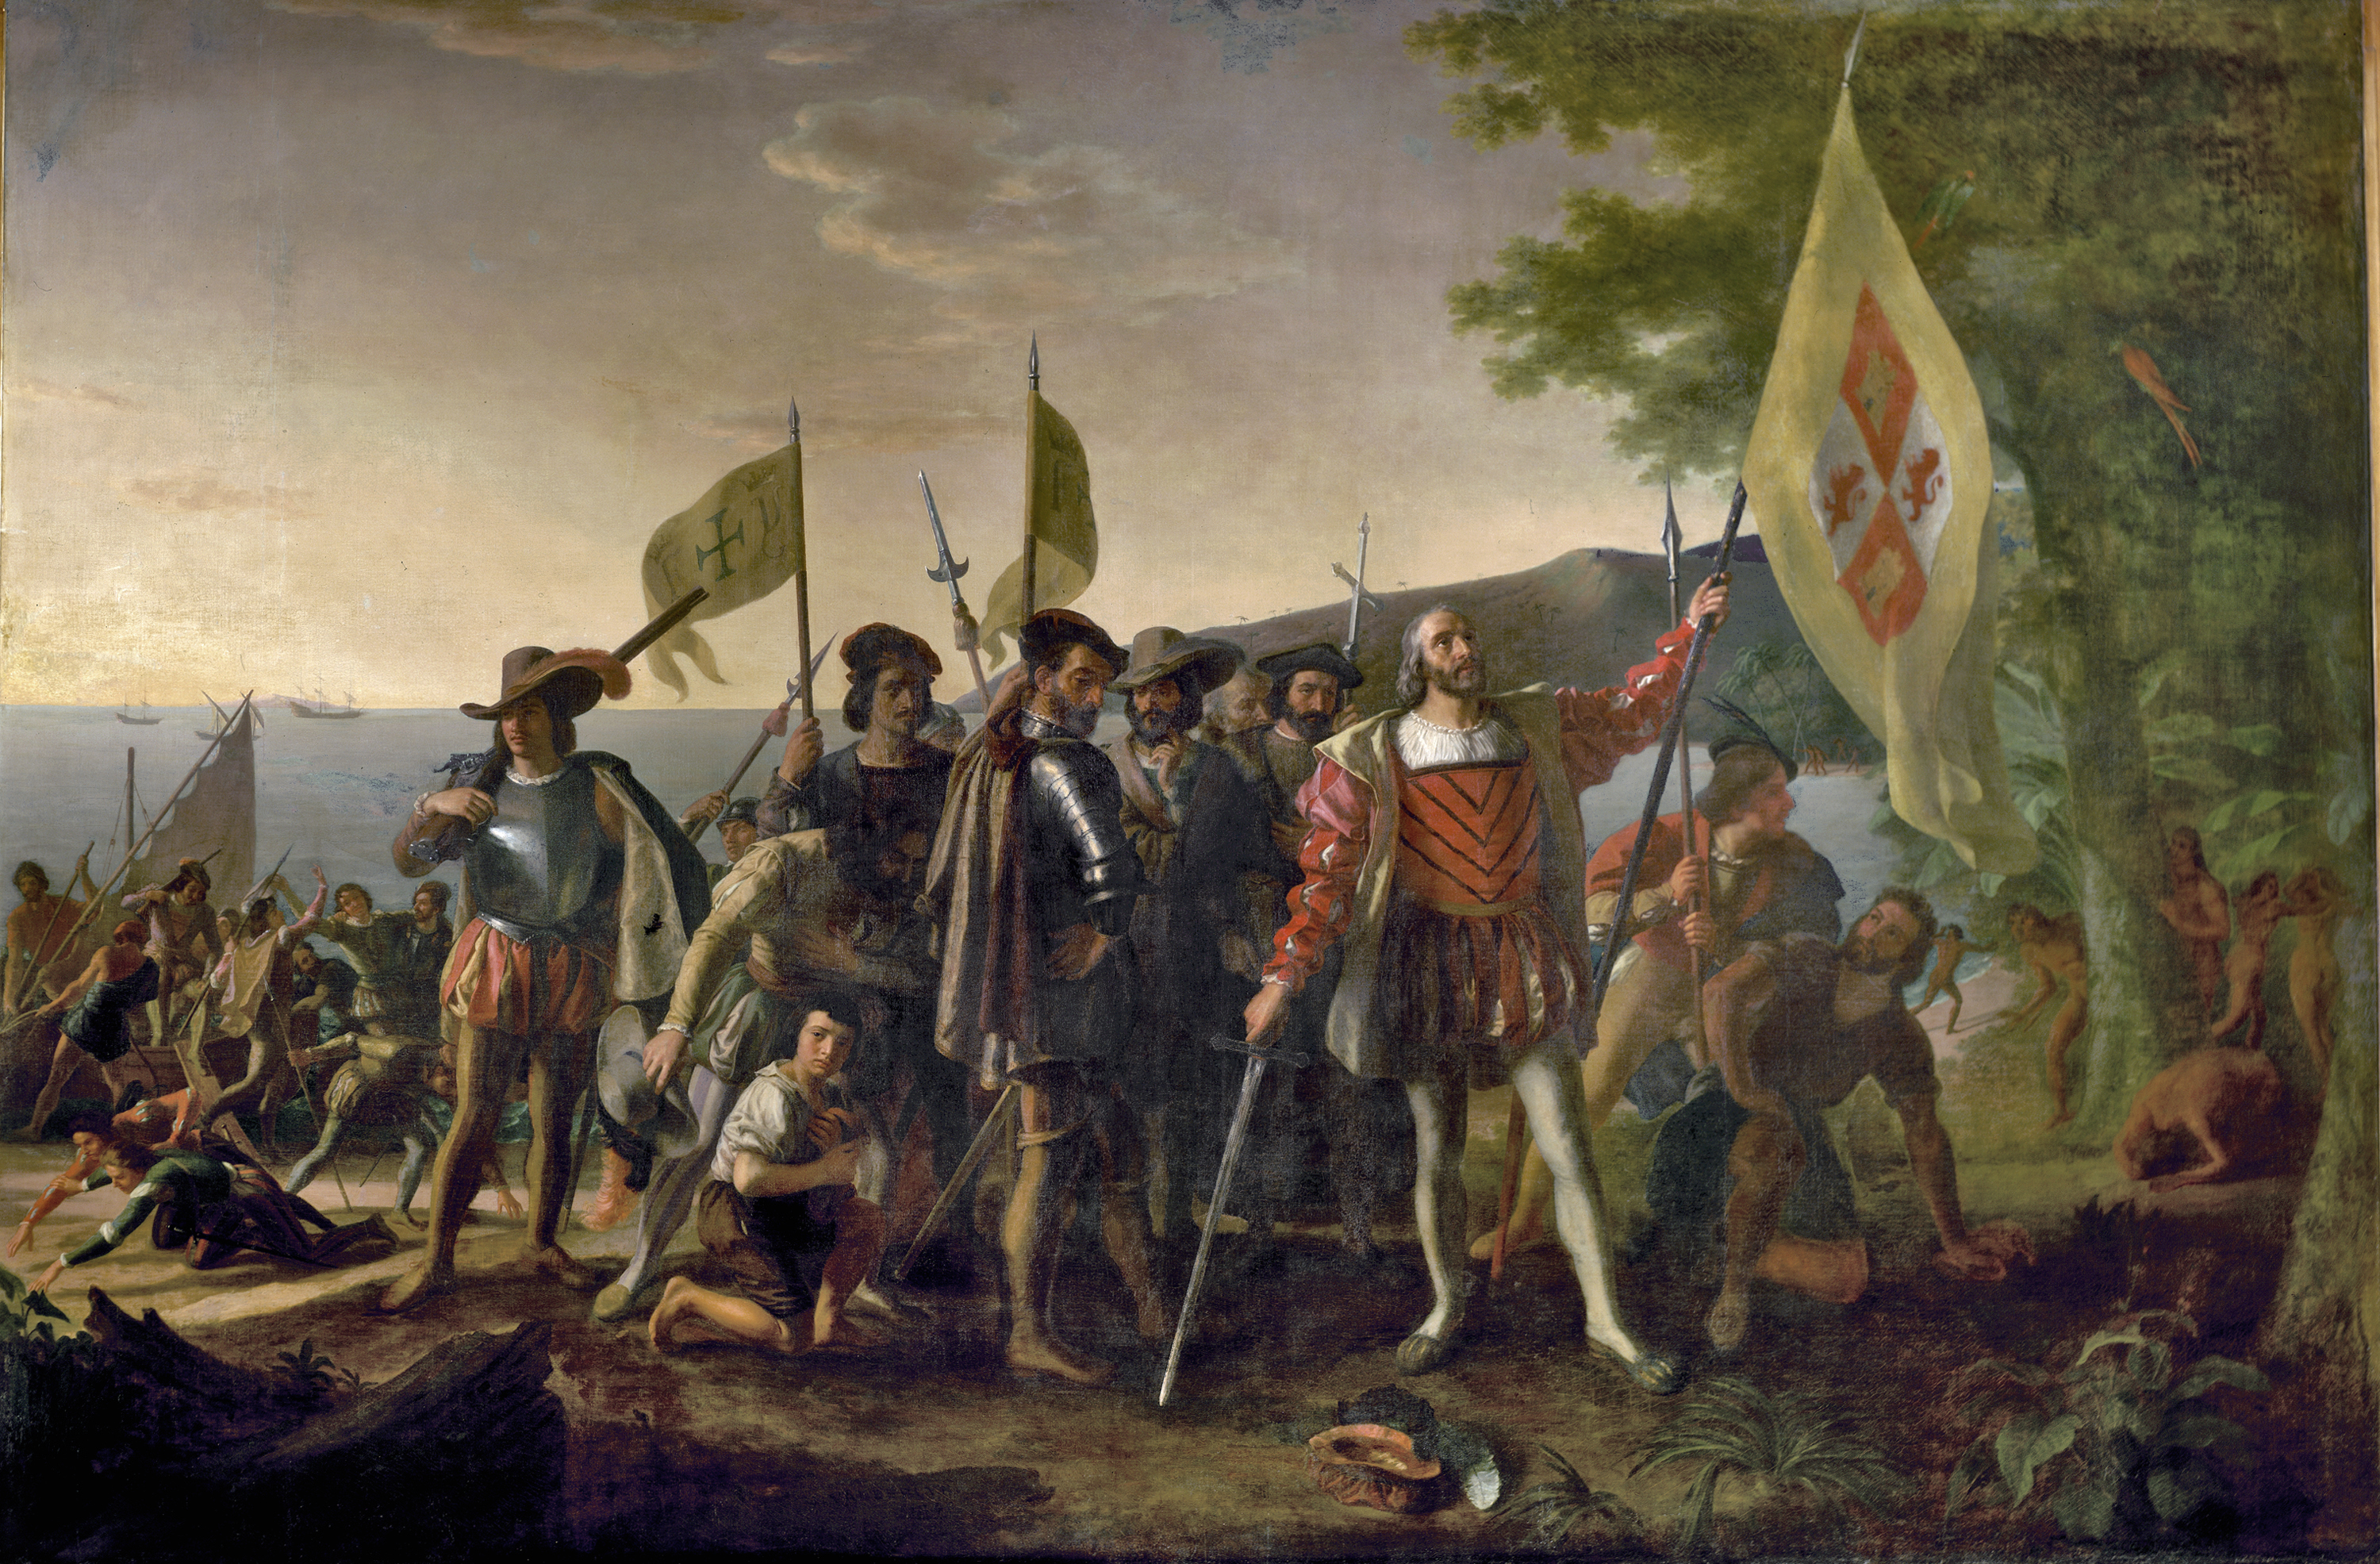 Columbus and the decisive moment in Caribbean history